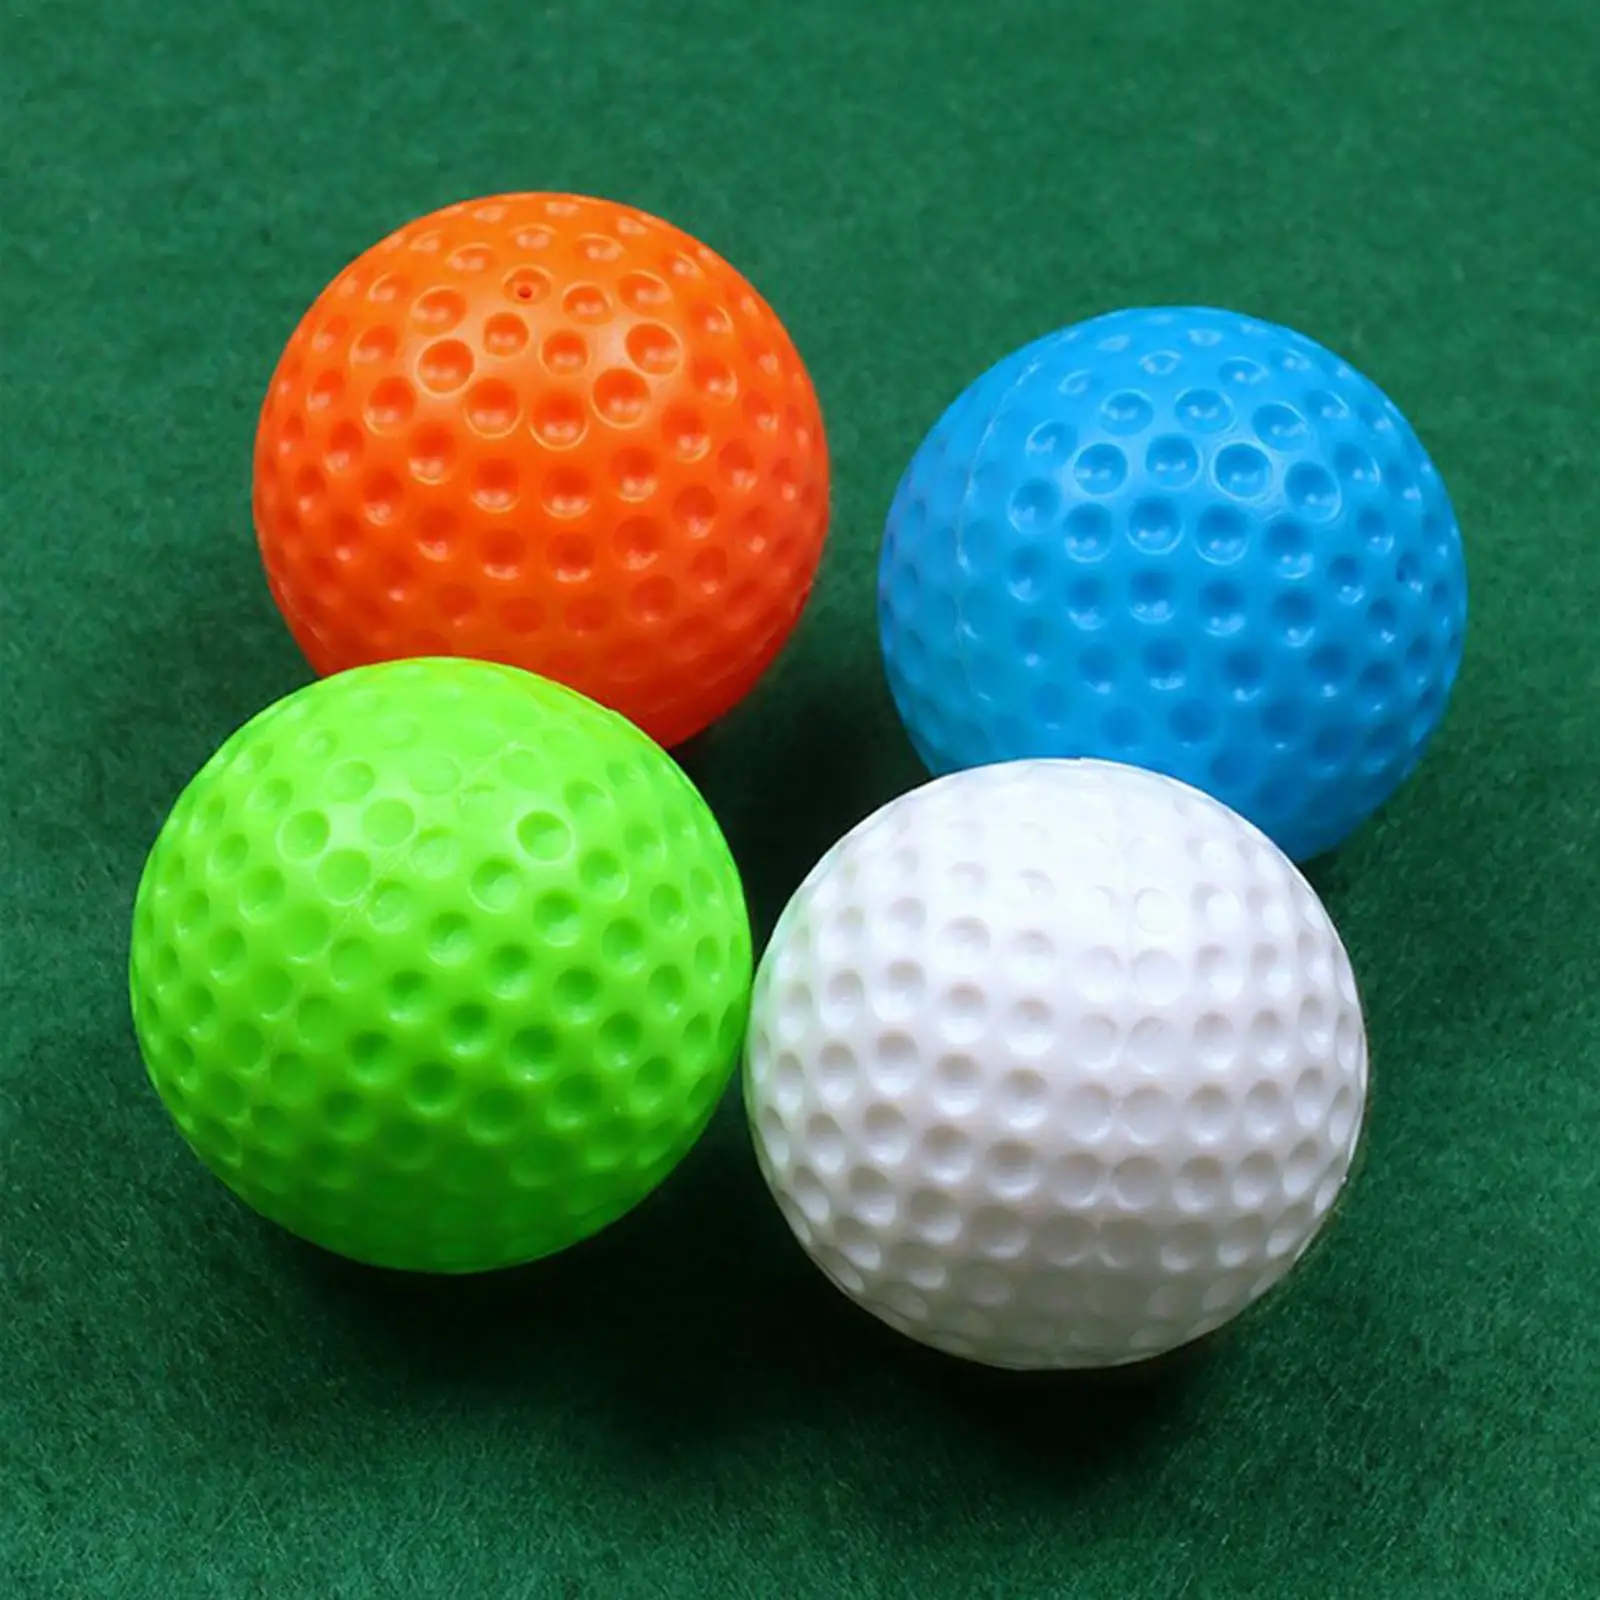 Mini Muti-Function Interactive Golf Practice Set for Party Backyard 